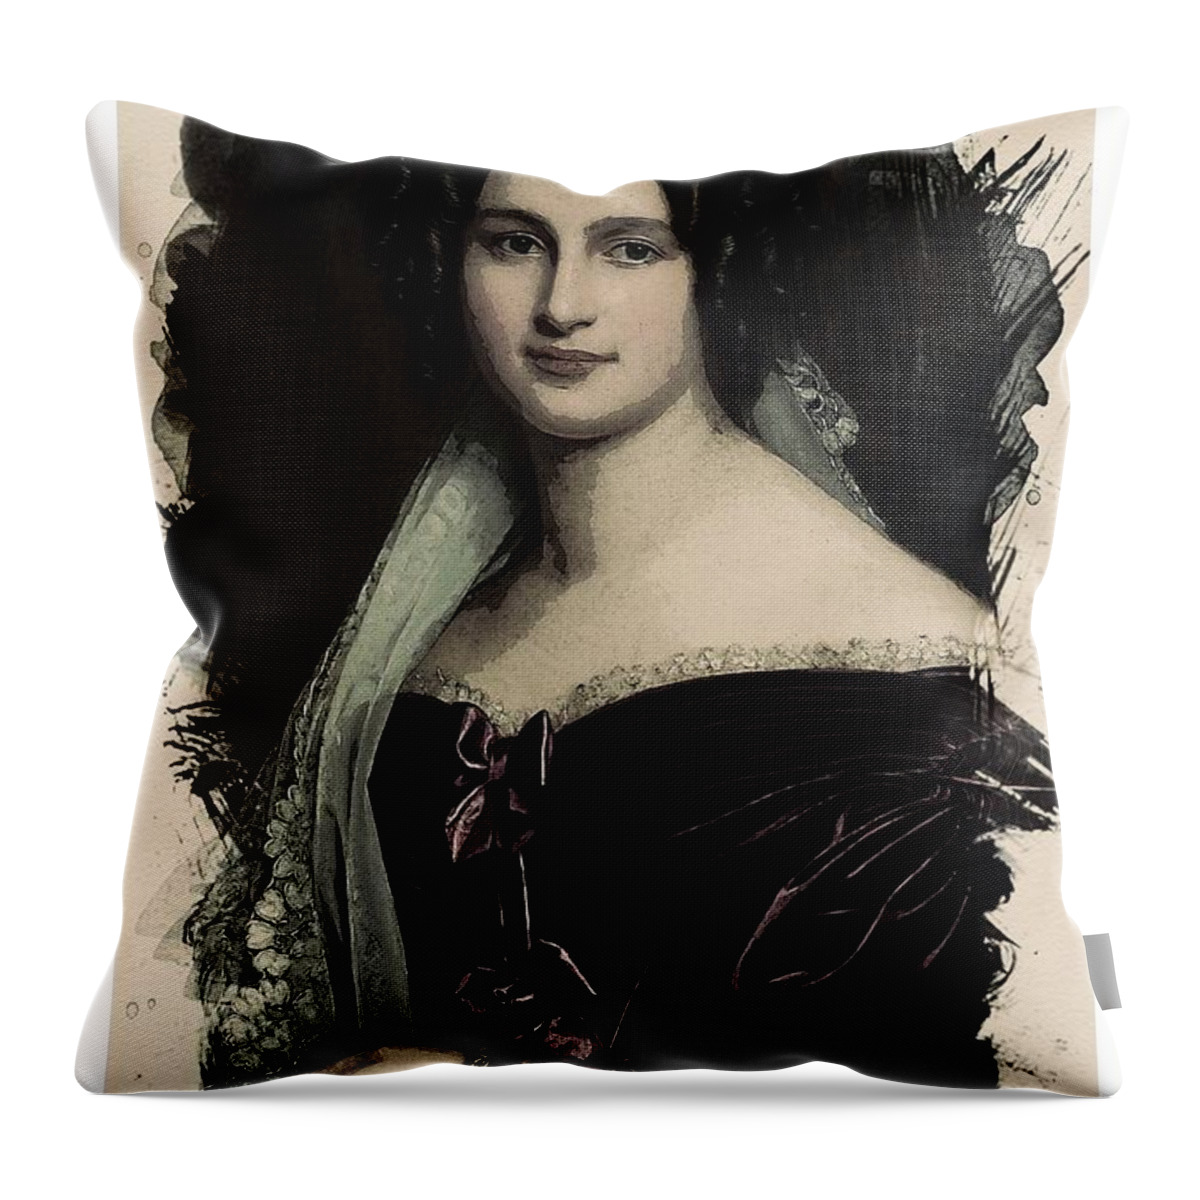 Girl Throw Pillow featuring the painting Young Faces from the past Series by Adam Asar, No 28 by Celestial Images